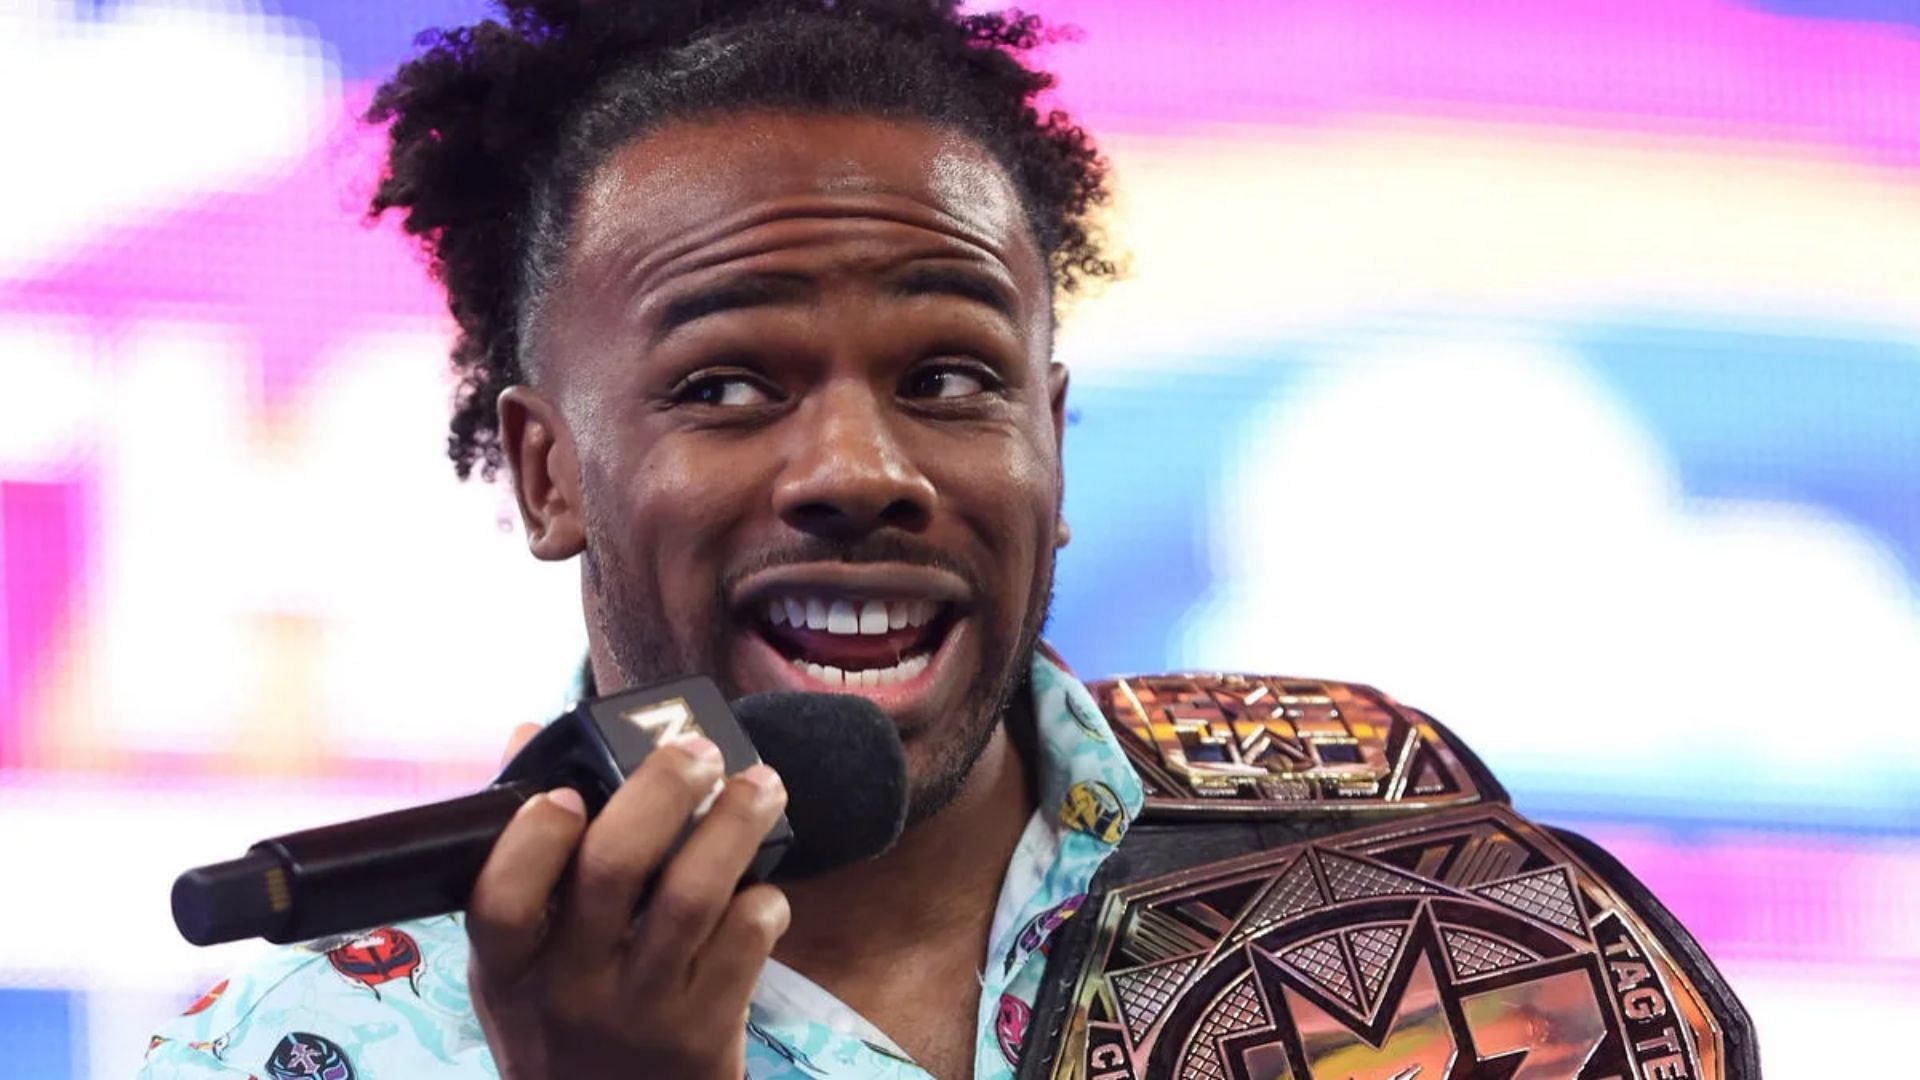 Xavier Woods recently held the NXT Tag Team Championship with Kofi Kingston